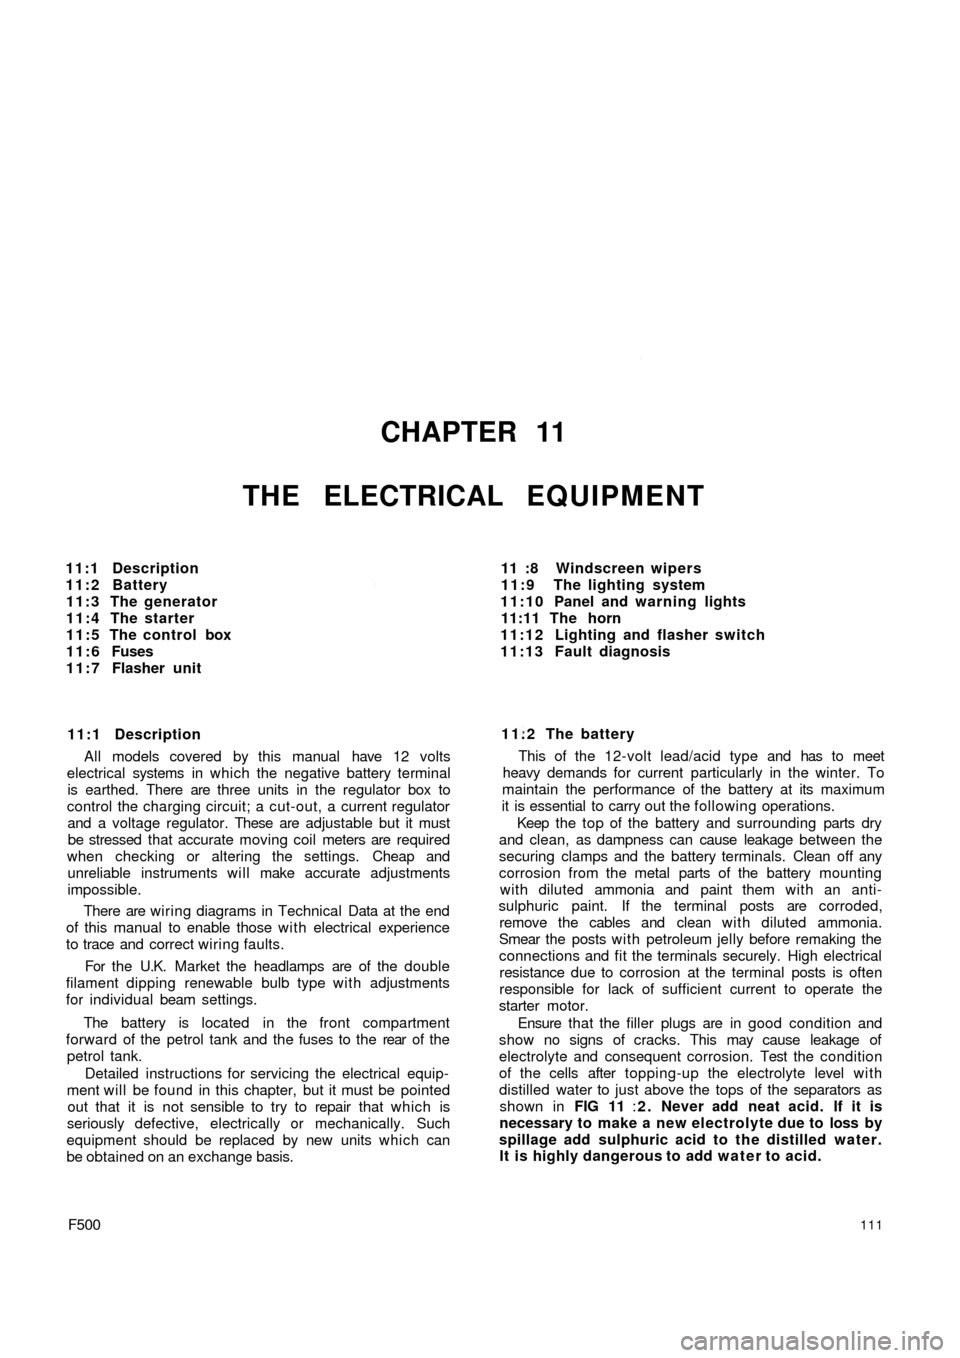 FIAT 500 1970 1.G Workshop Manual CHAPTER 11
THE ELECTRICAL EQUIPMENT
11:1 Description
11:2 Battery
11:3 The generator
11:4 The starter
11:5 The control box
1 1 : 6 Fuses
1 1 : 7 Flasher unit
11:1 Description
All models covered by thi